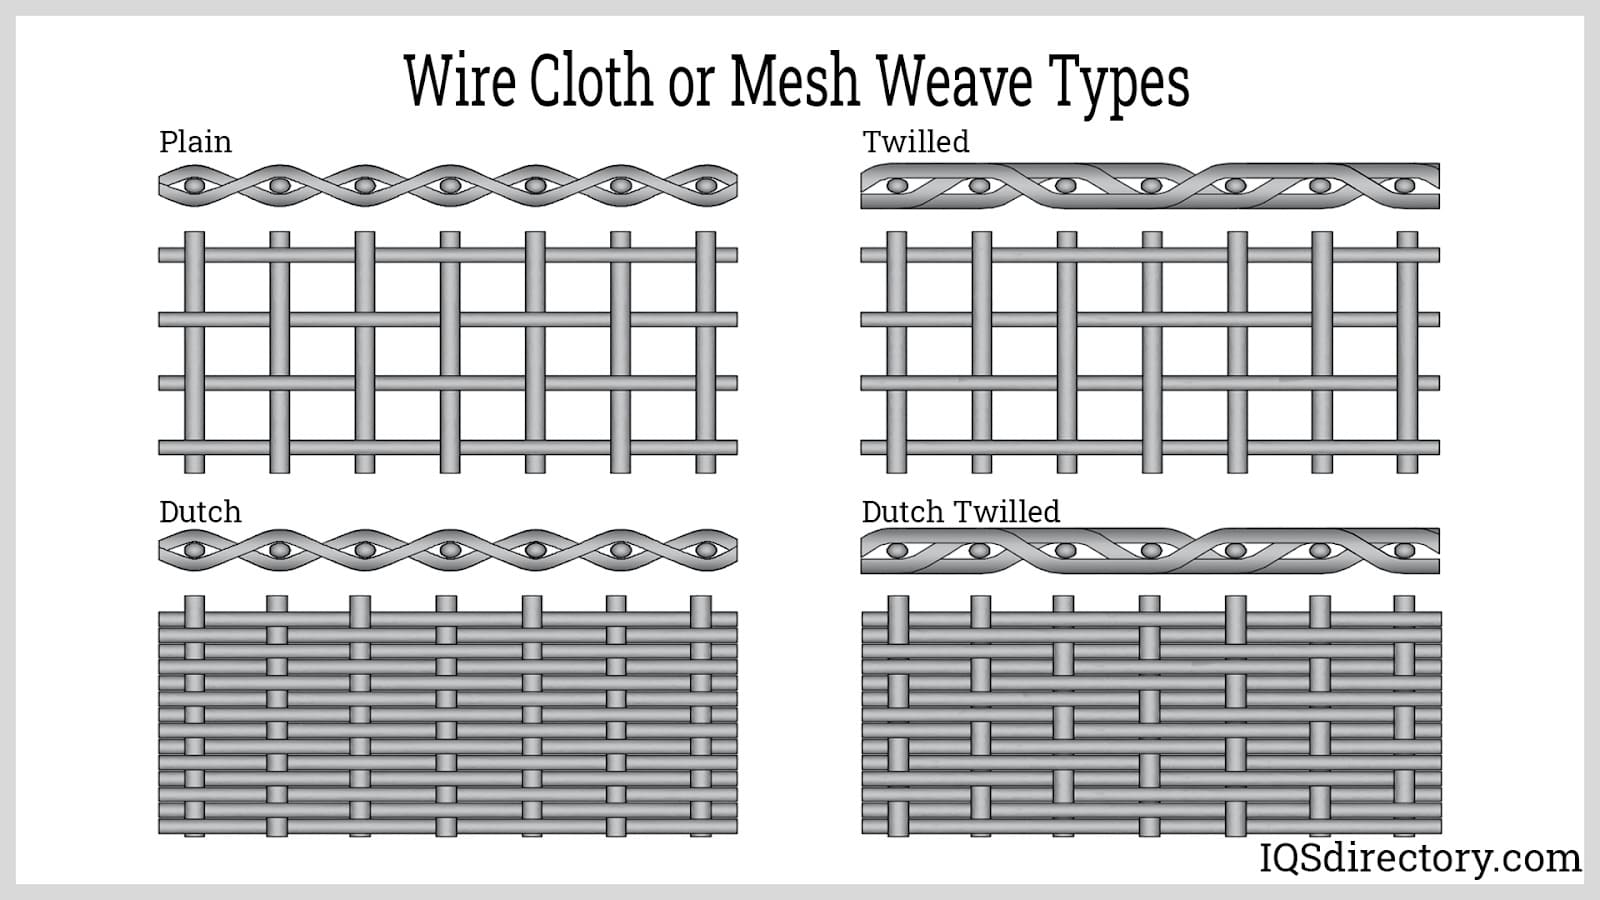 Weave types and mesh shapes